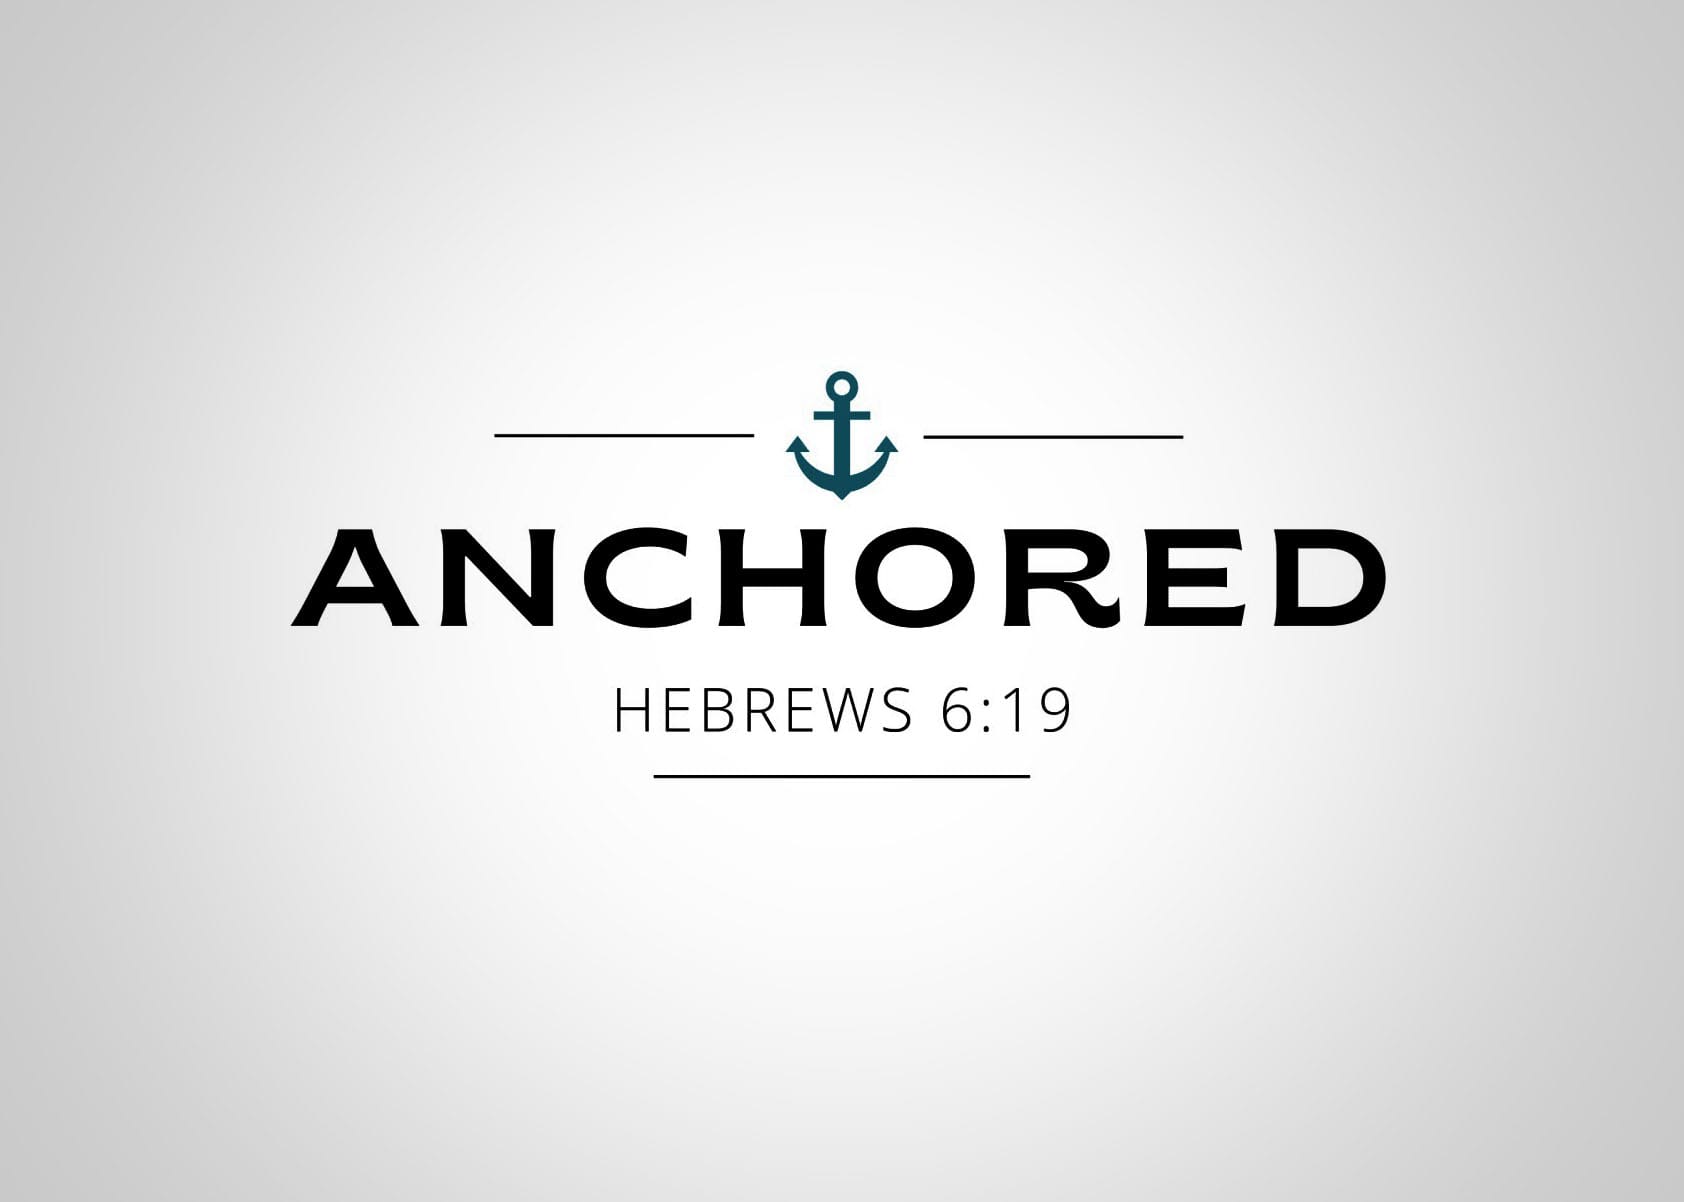 Prestonwood Baptist Church will host “Anchored,” a 2-day conference hosted by the school’s Biblical Worldview Institute (BWi), Nov. 1 and 2.